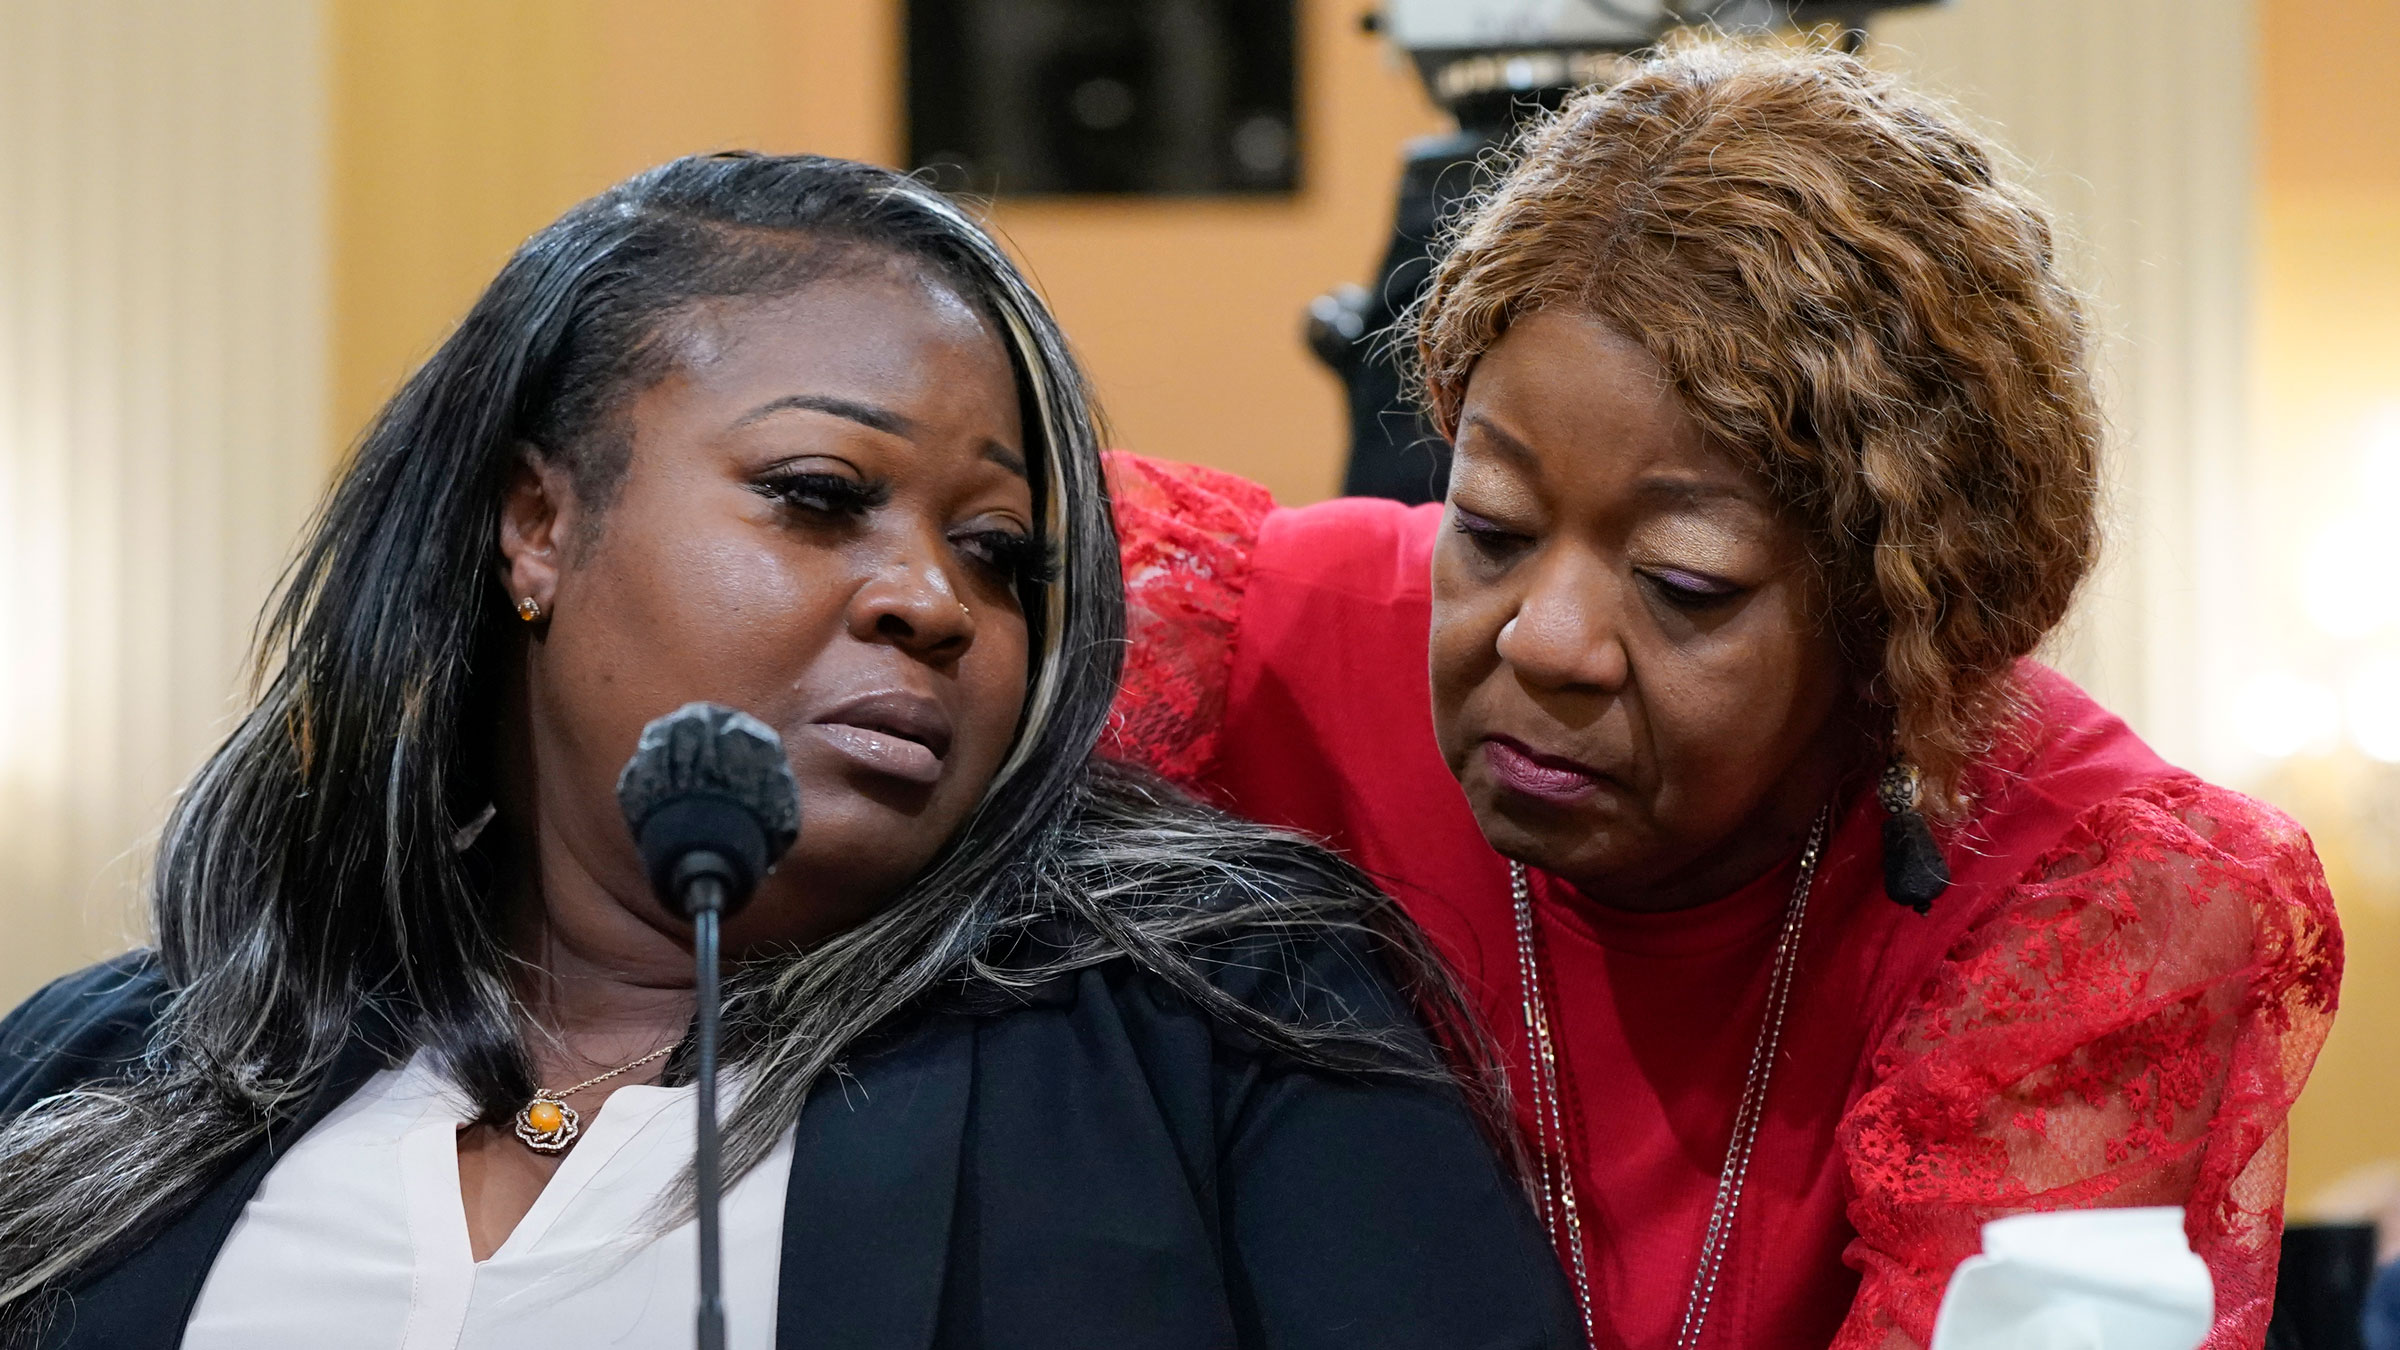 Wandrea "Shaye" Moss is comforted by her mother, Ruby Freeman, during Tuesday's hearing.